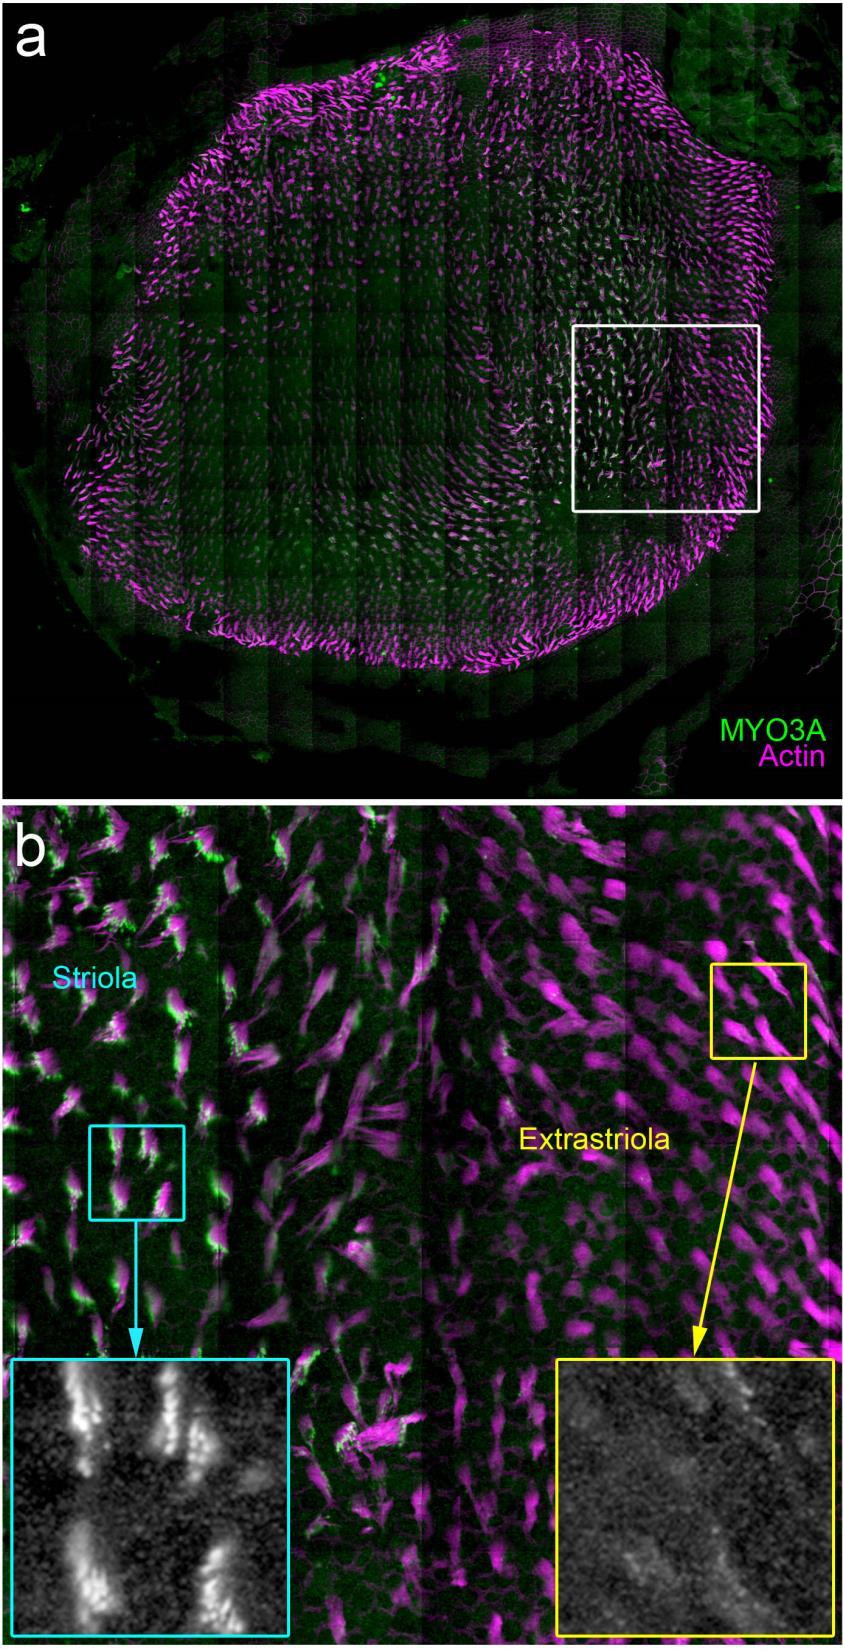 Supplementary Figure 3. High-resolution view of MYO3A in the striolar region of the utricle. (a) Survey of utricle at low resolution. (b) Magnification of region indicated by white box in panel (a).